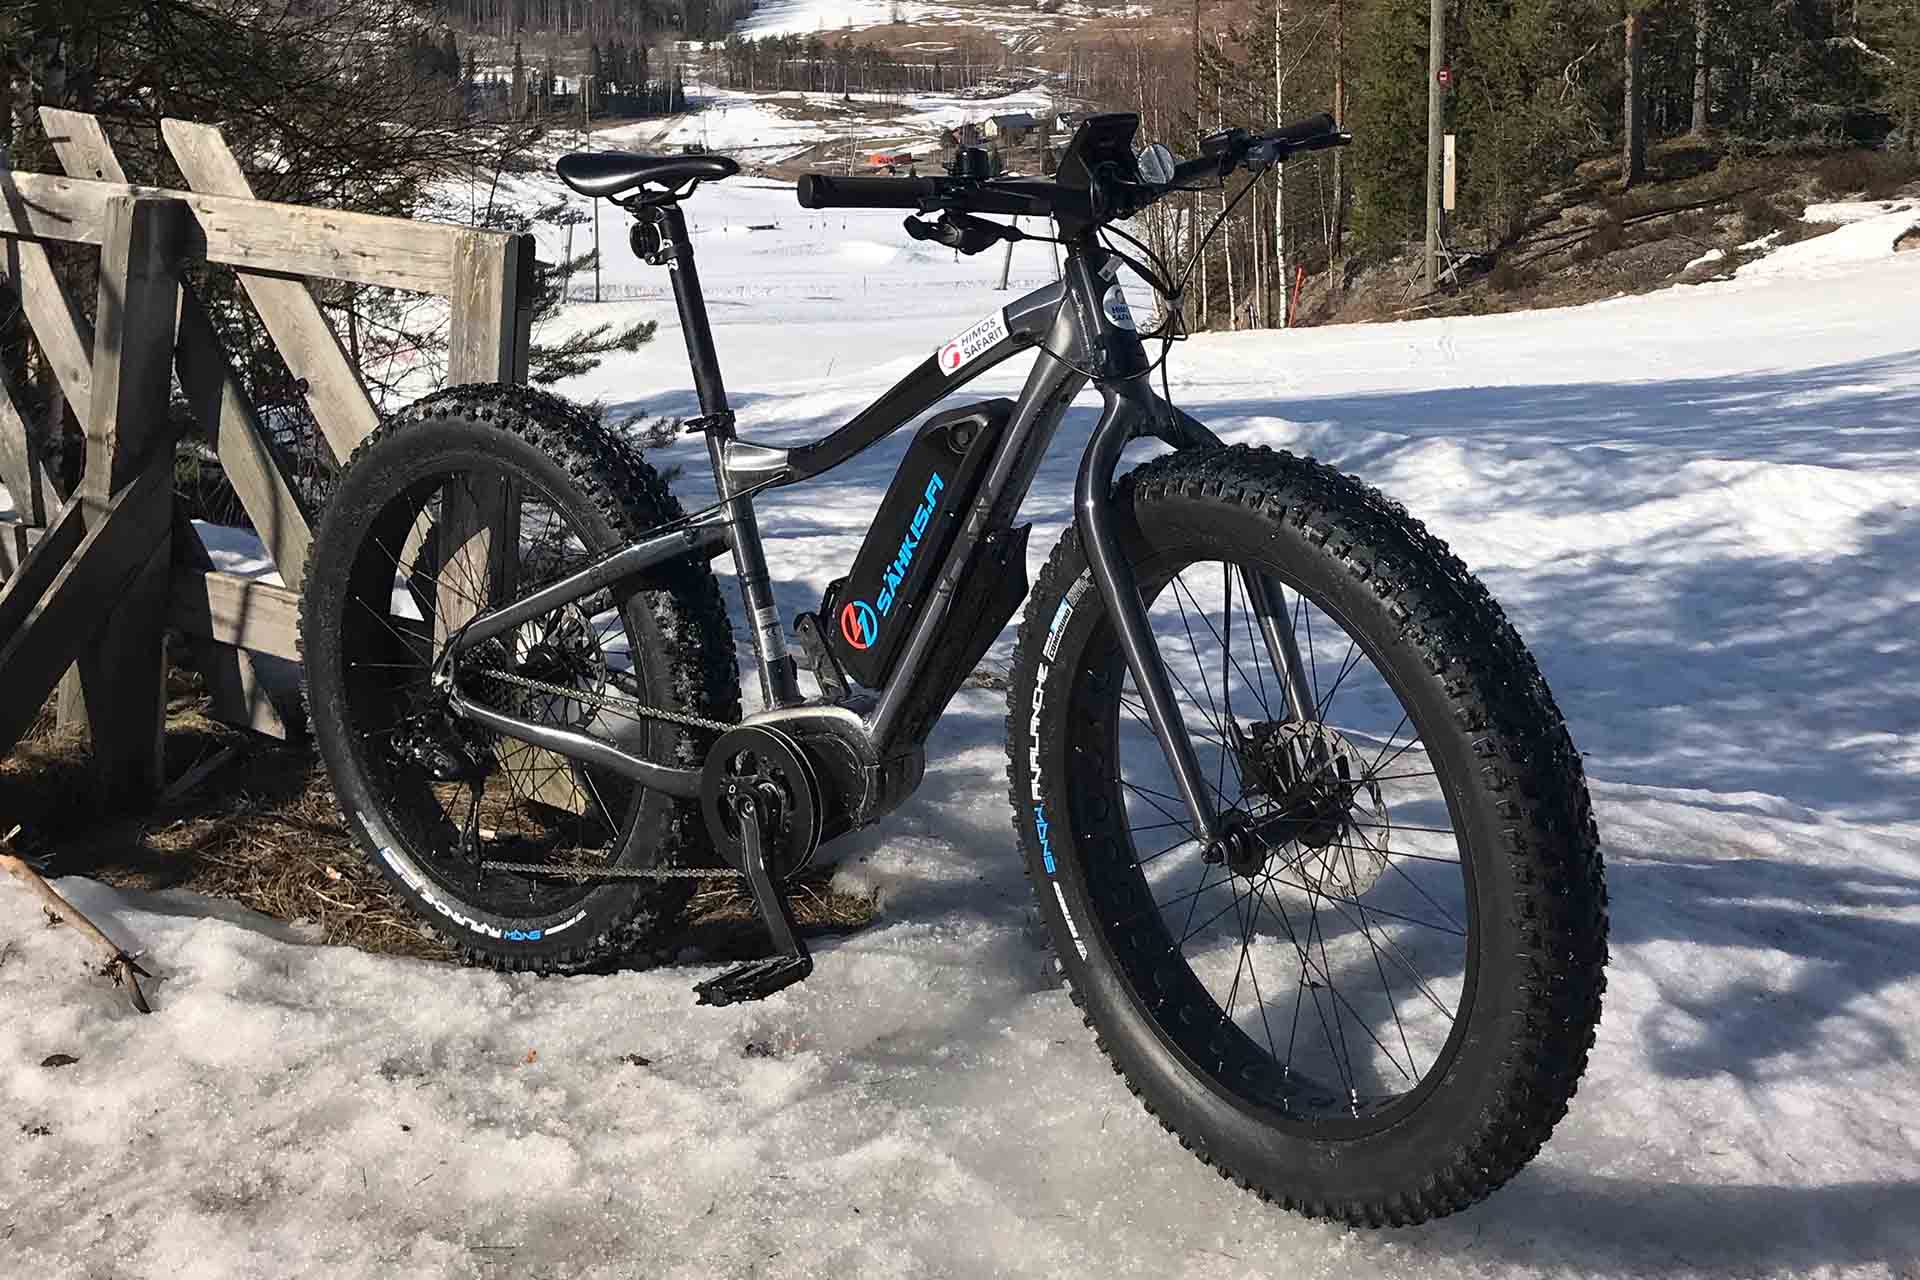 Fatbikes / Winter time bicycling